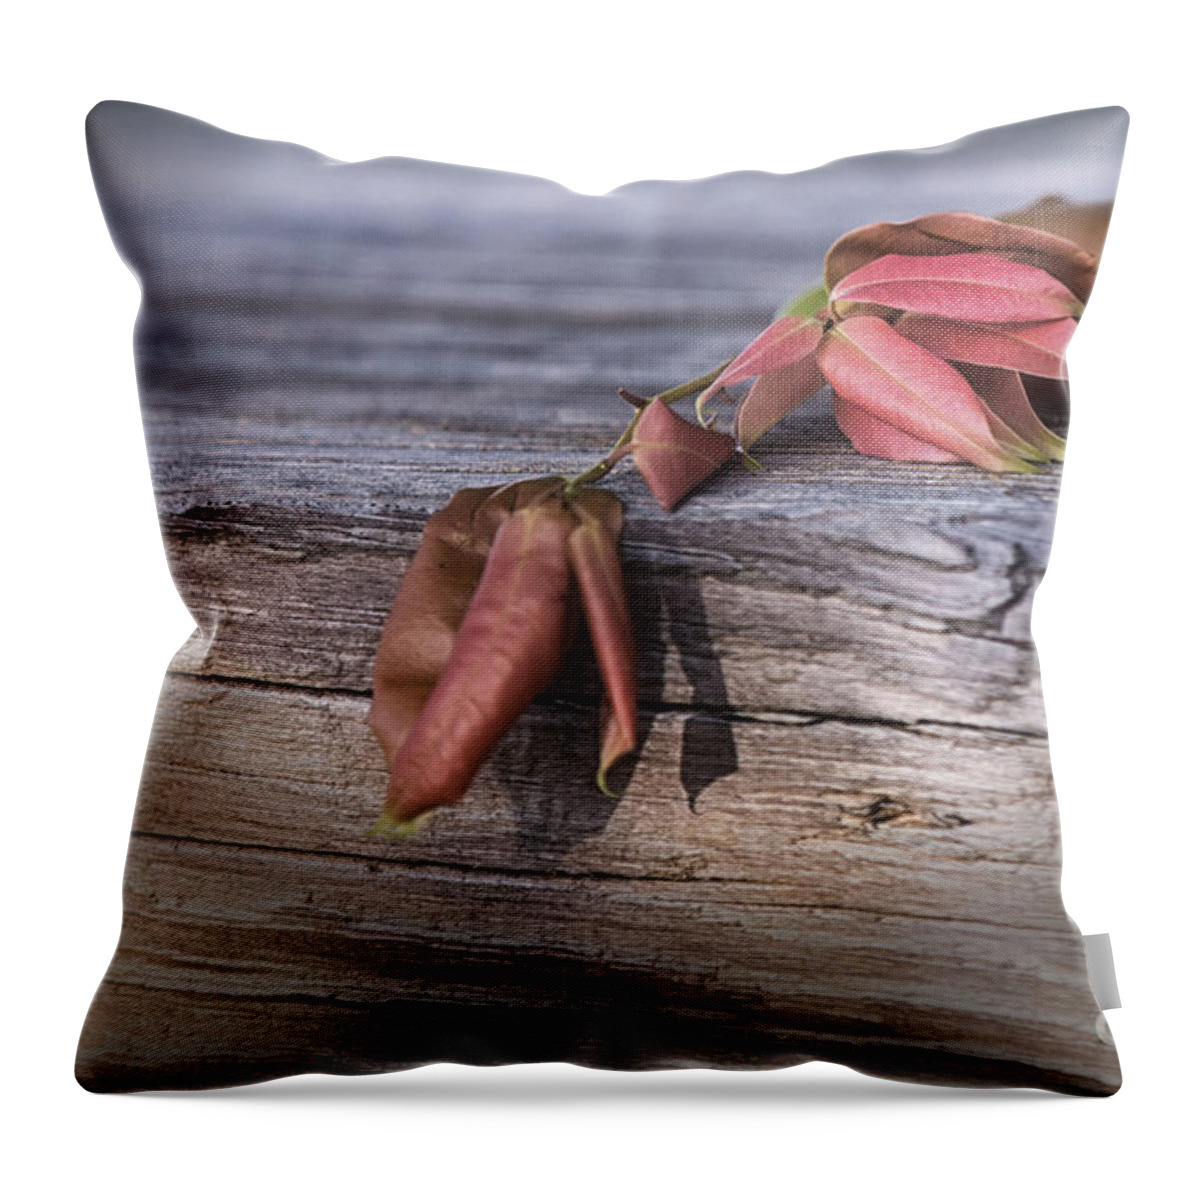 Colored Leaves And Wood Textrues Throw Pillow featuring the photograph Mindfulness In Nature by Mary Lou Chmura